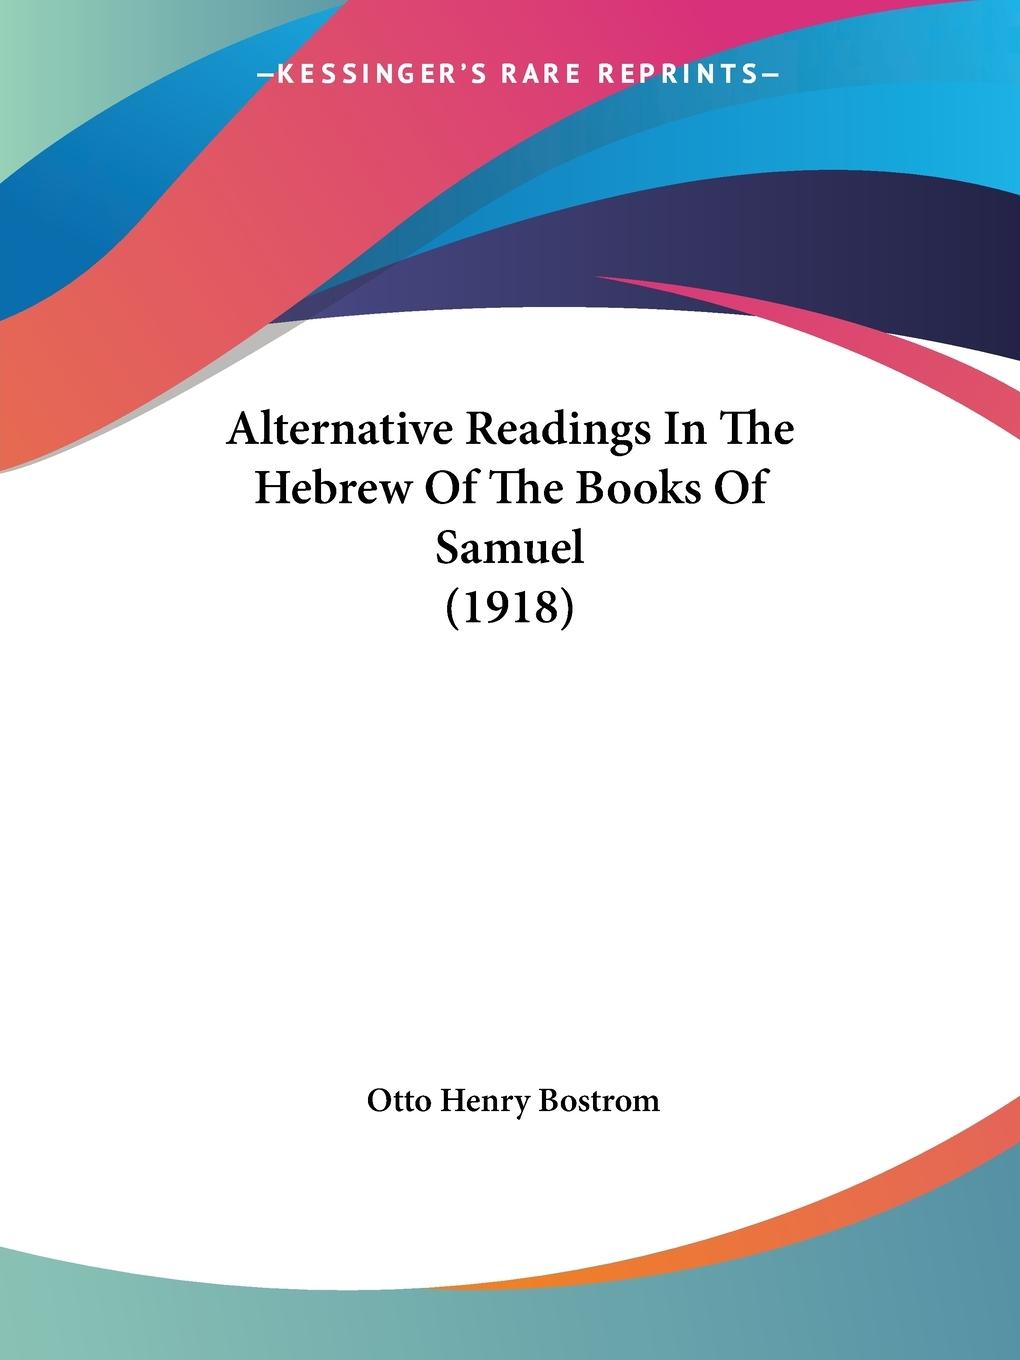 Alternative Readings In The Hebrew Of The Books Of Samuel (1918) - Bostrom, Otto Henry